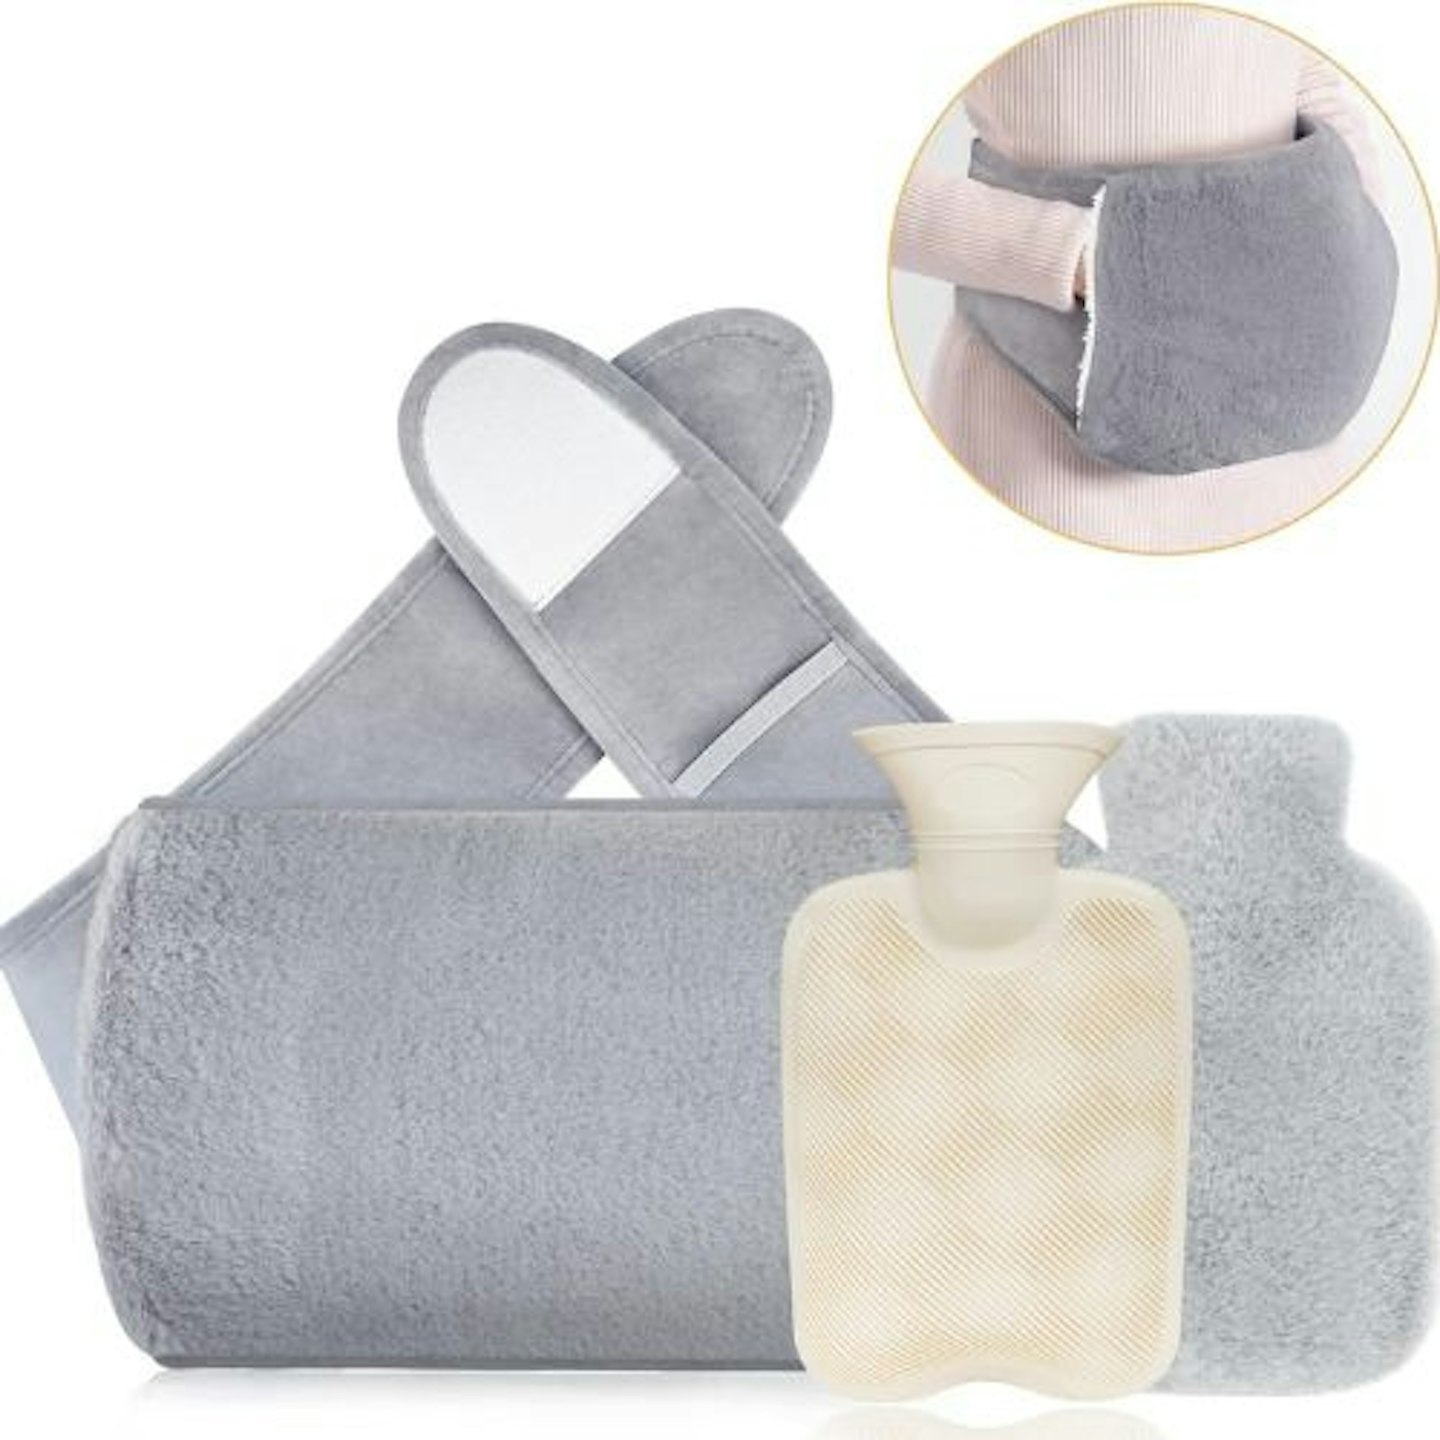 AQhui Hot Water Bottle with Waist Cover